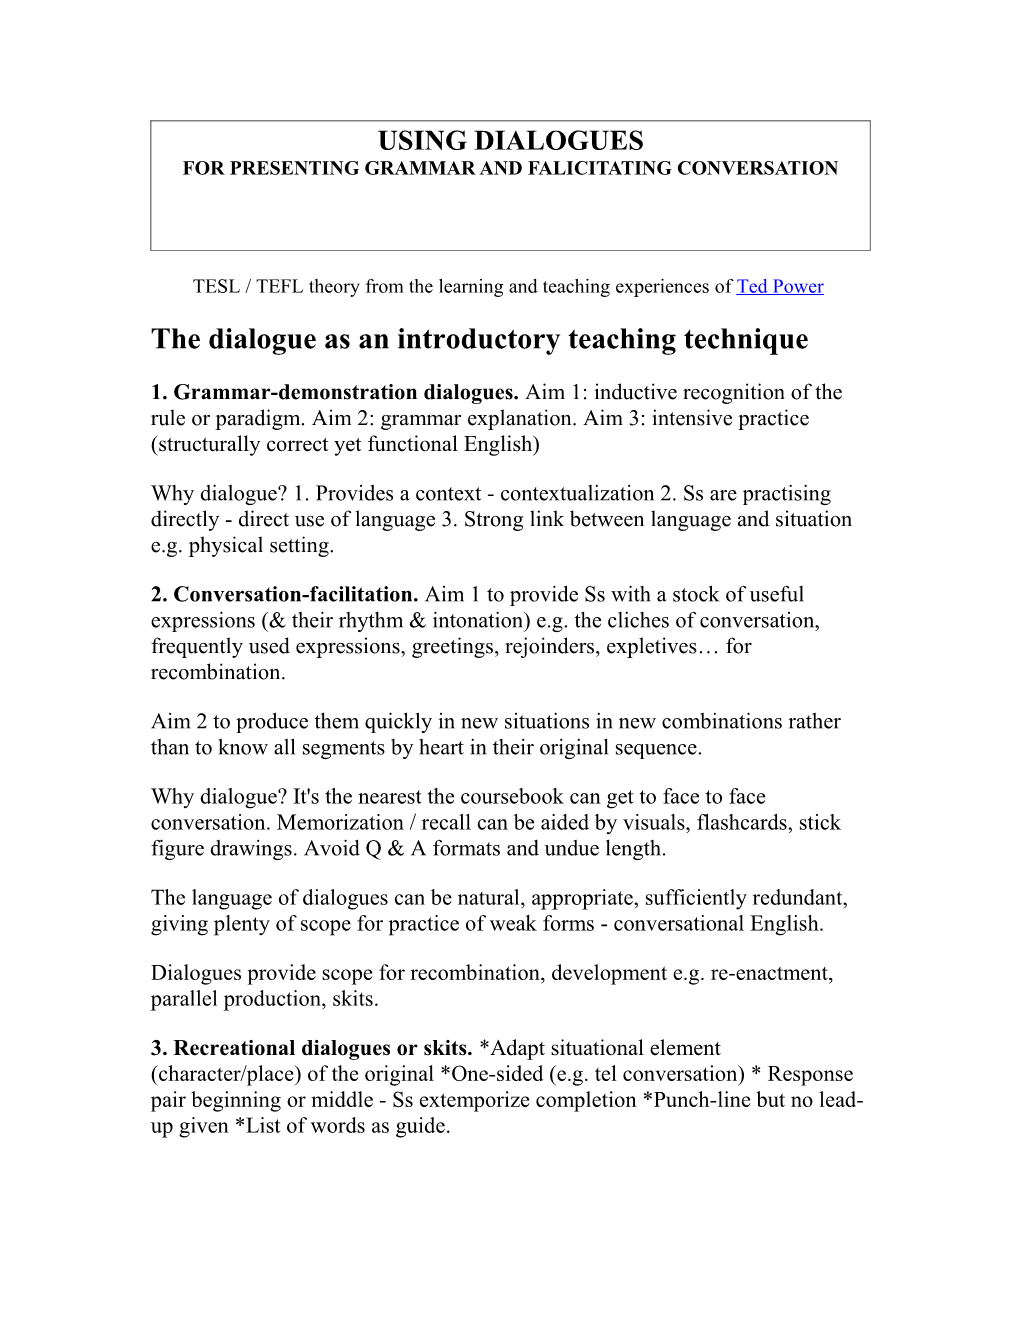 The Dialogue As an Introductory Teaching Technique